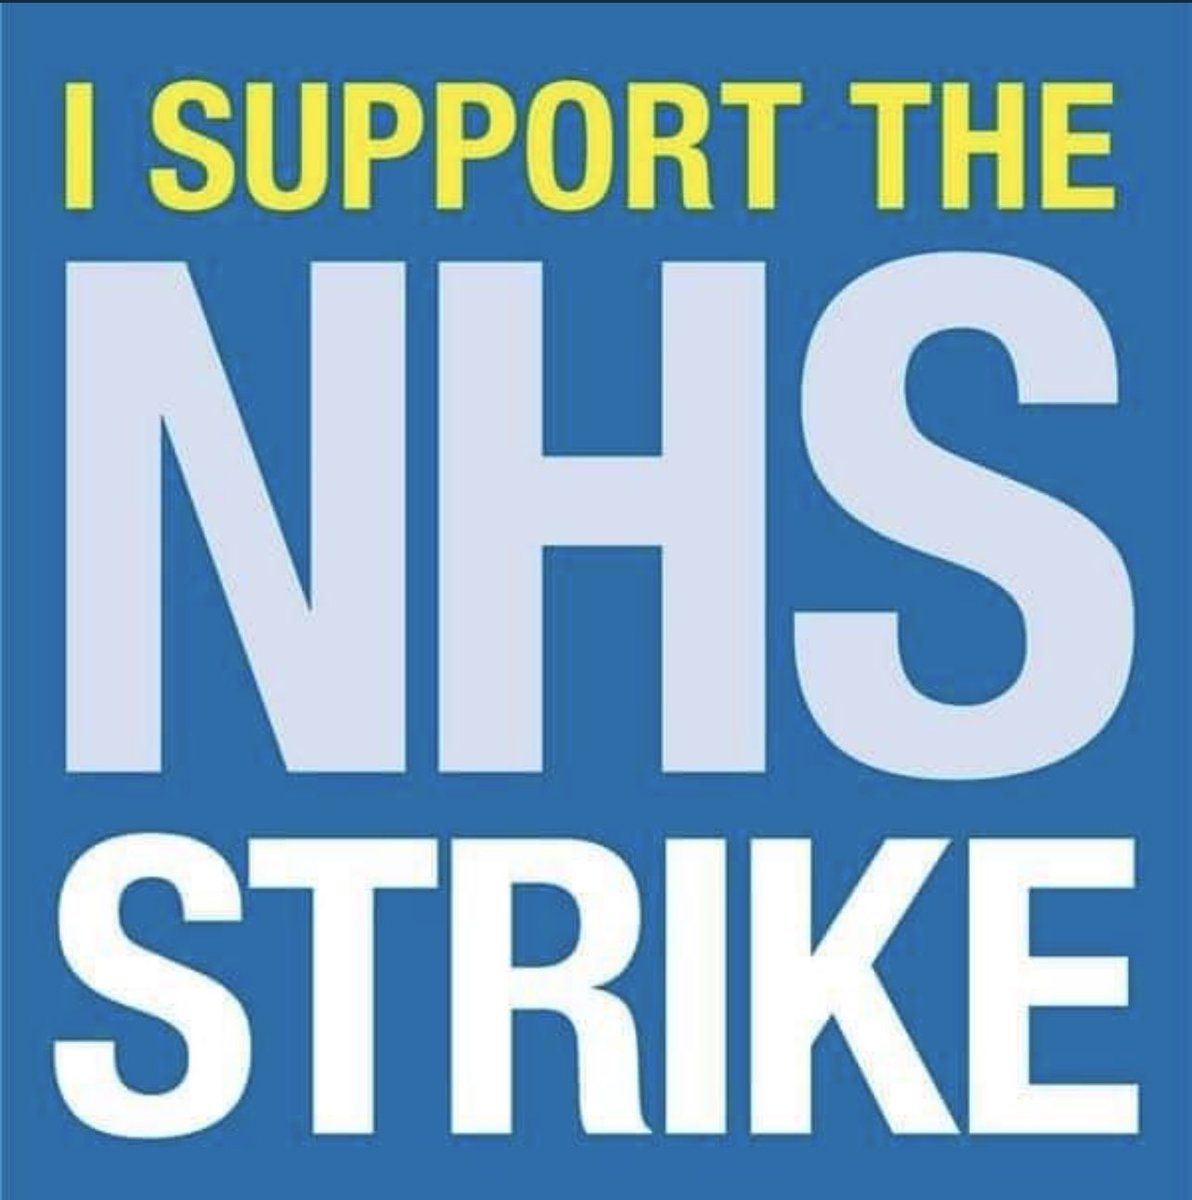 @Heccles94 Power to the people and #SaveOurNHS #SupportTheNurses